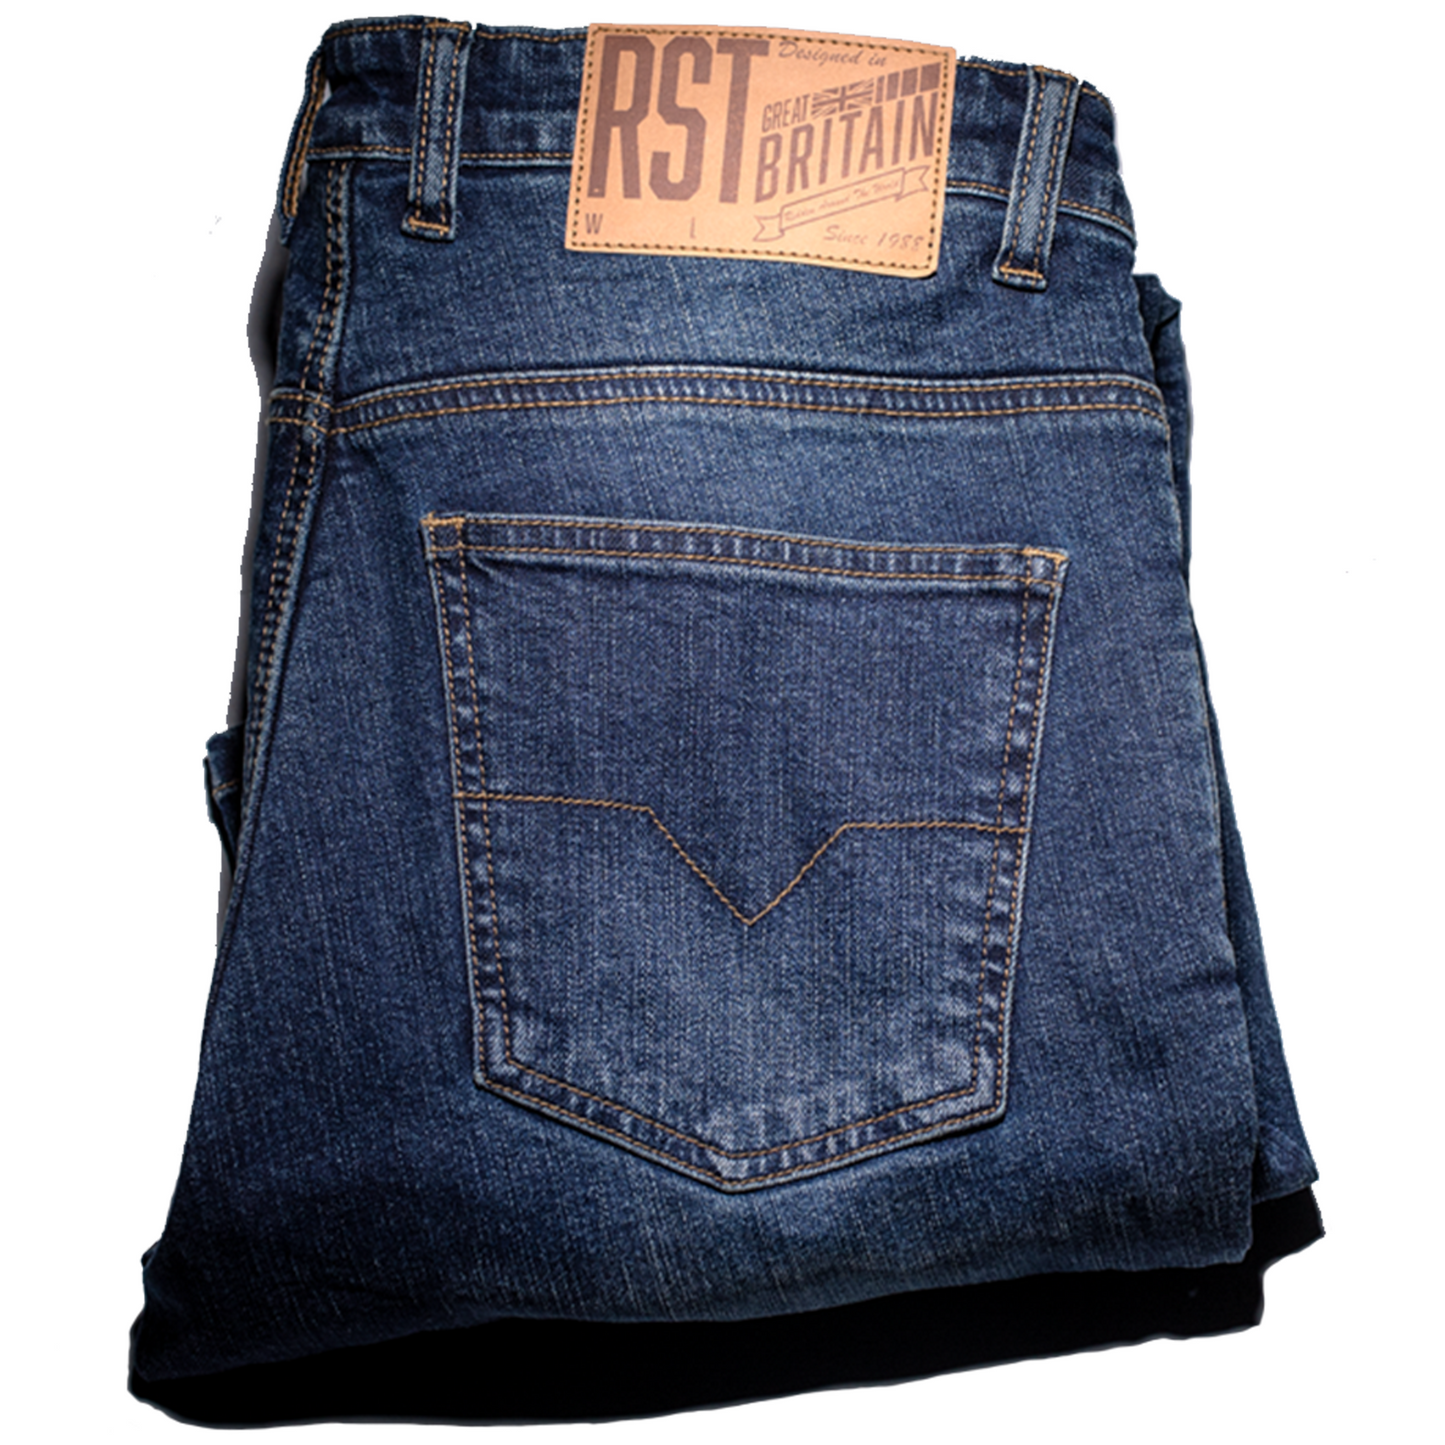 RST Single Layer Reinforced CE Textile Jeans